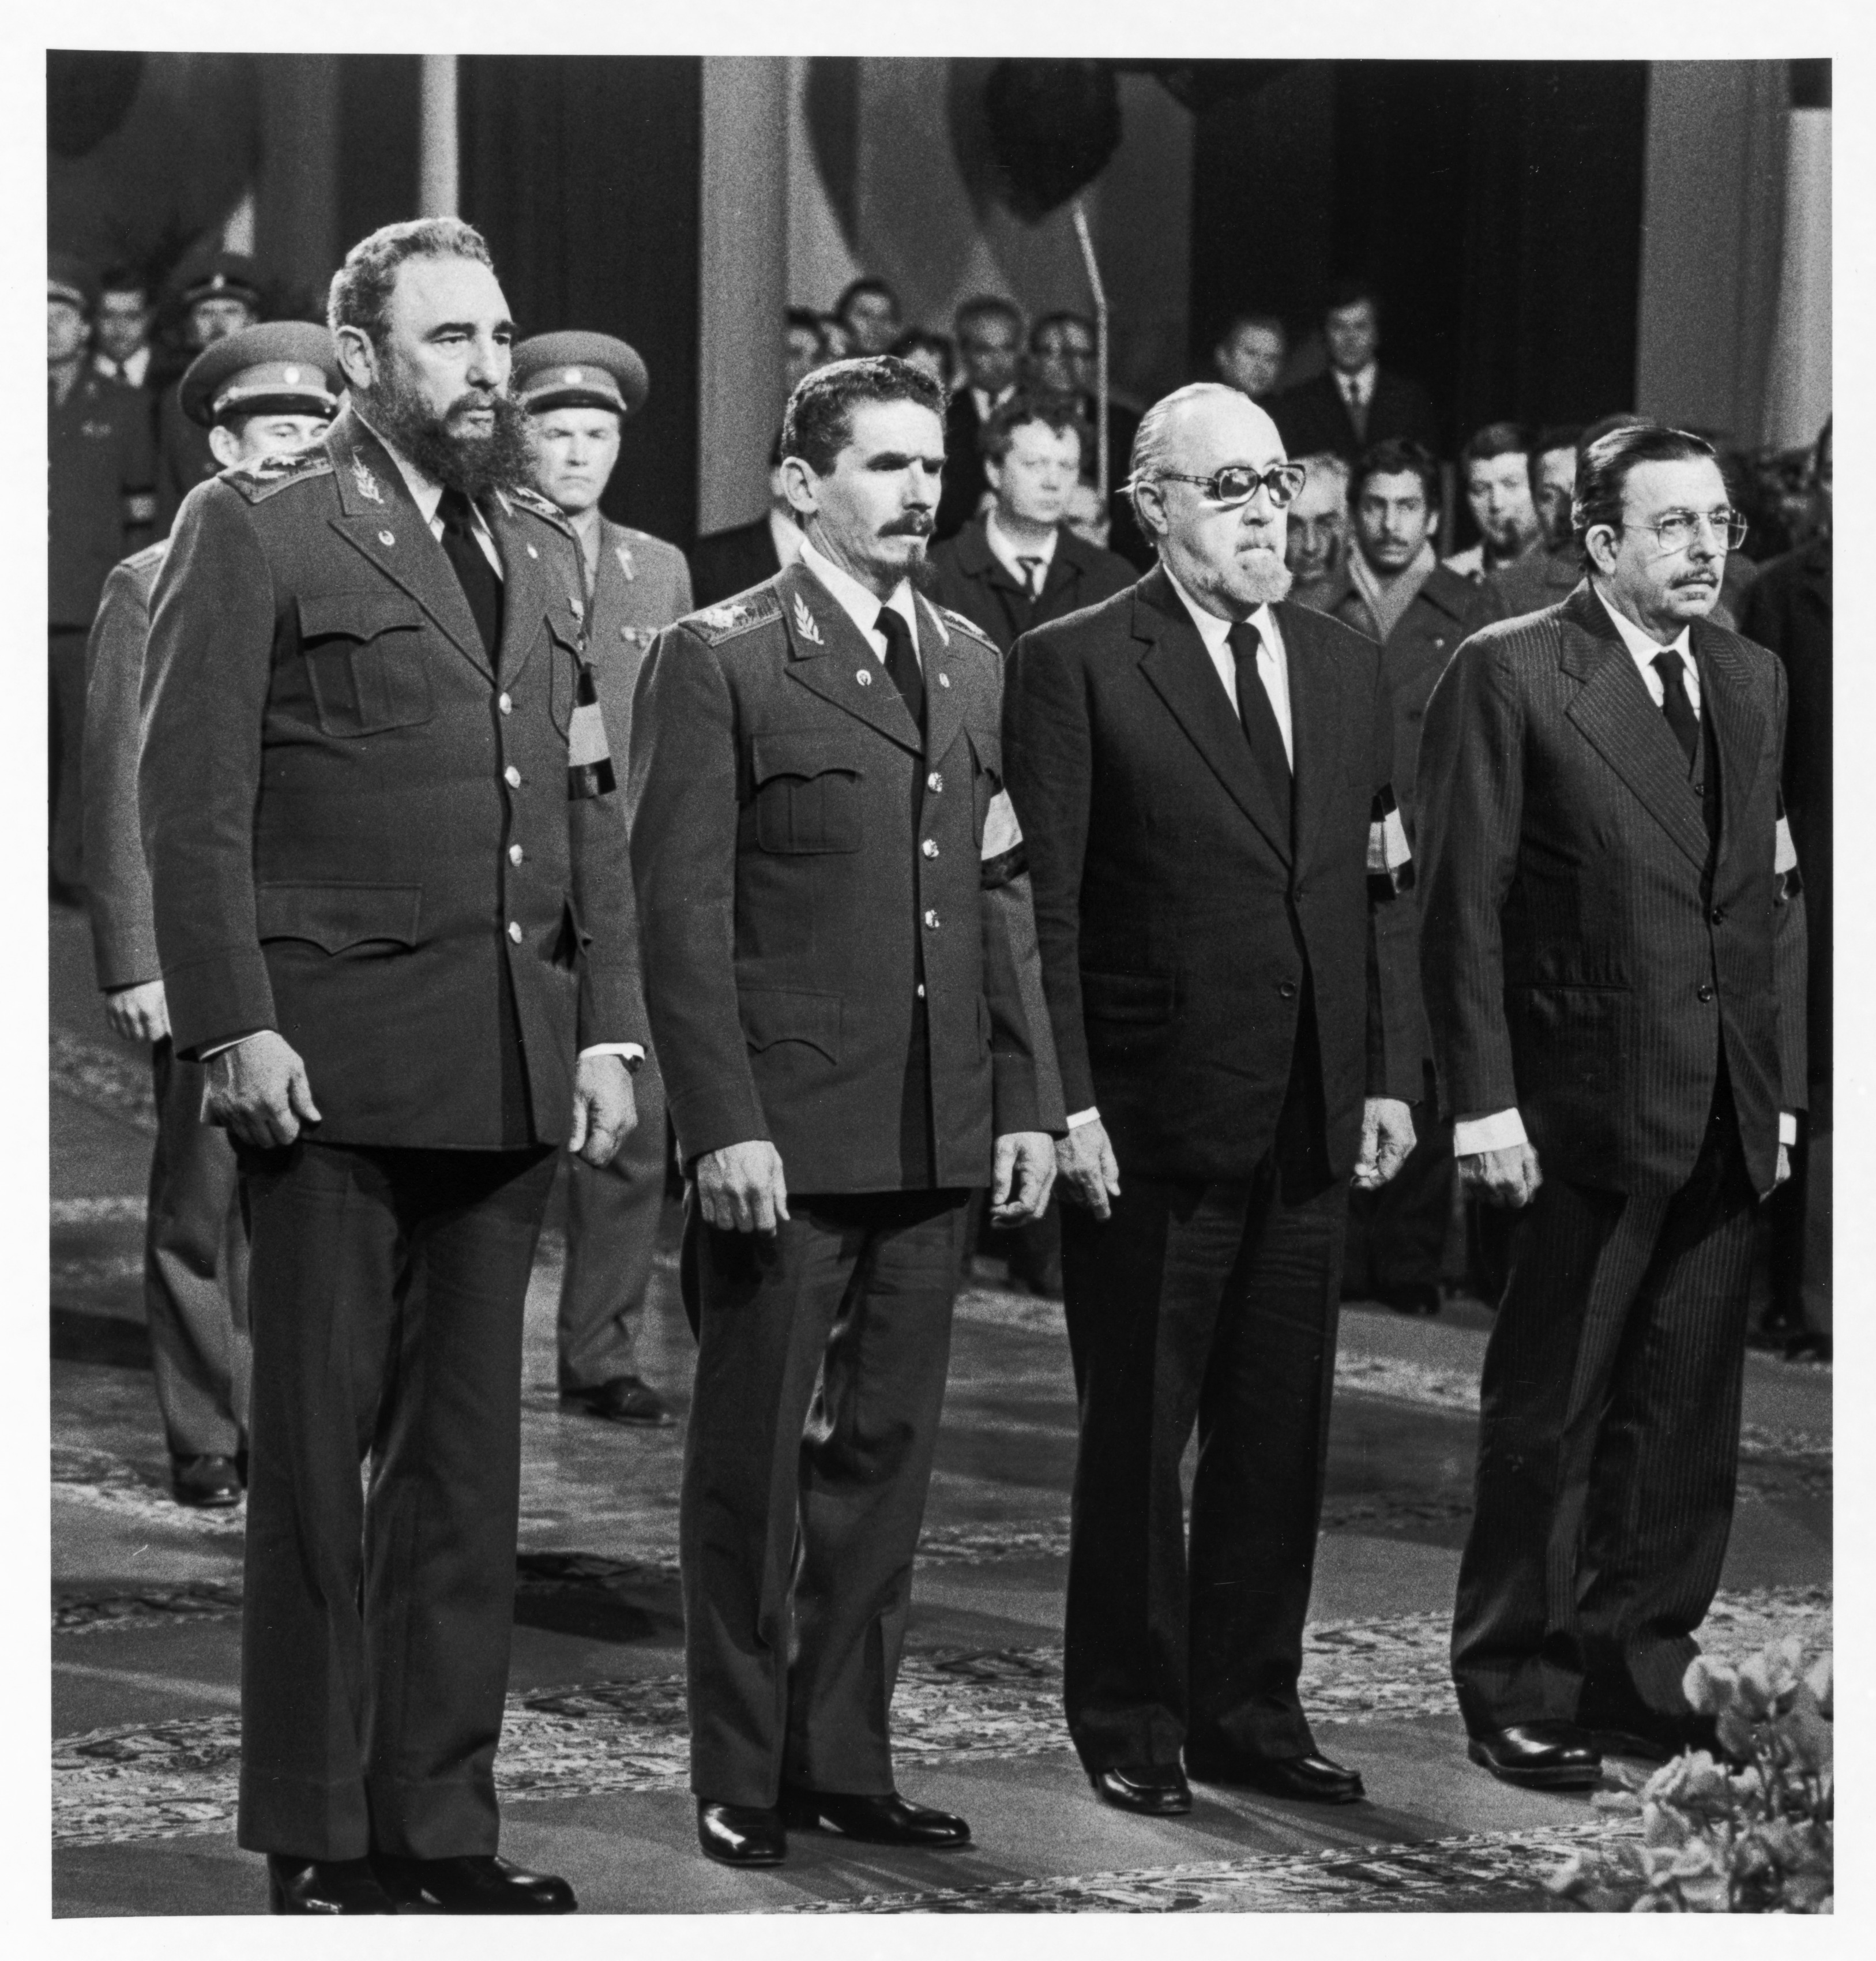 Castro paying his respects at Andropov's funeral, February 1984